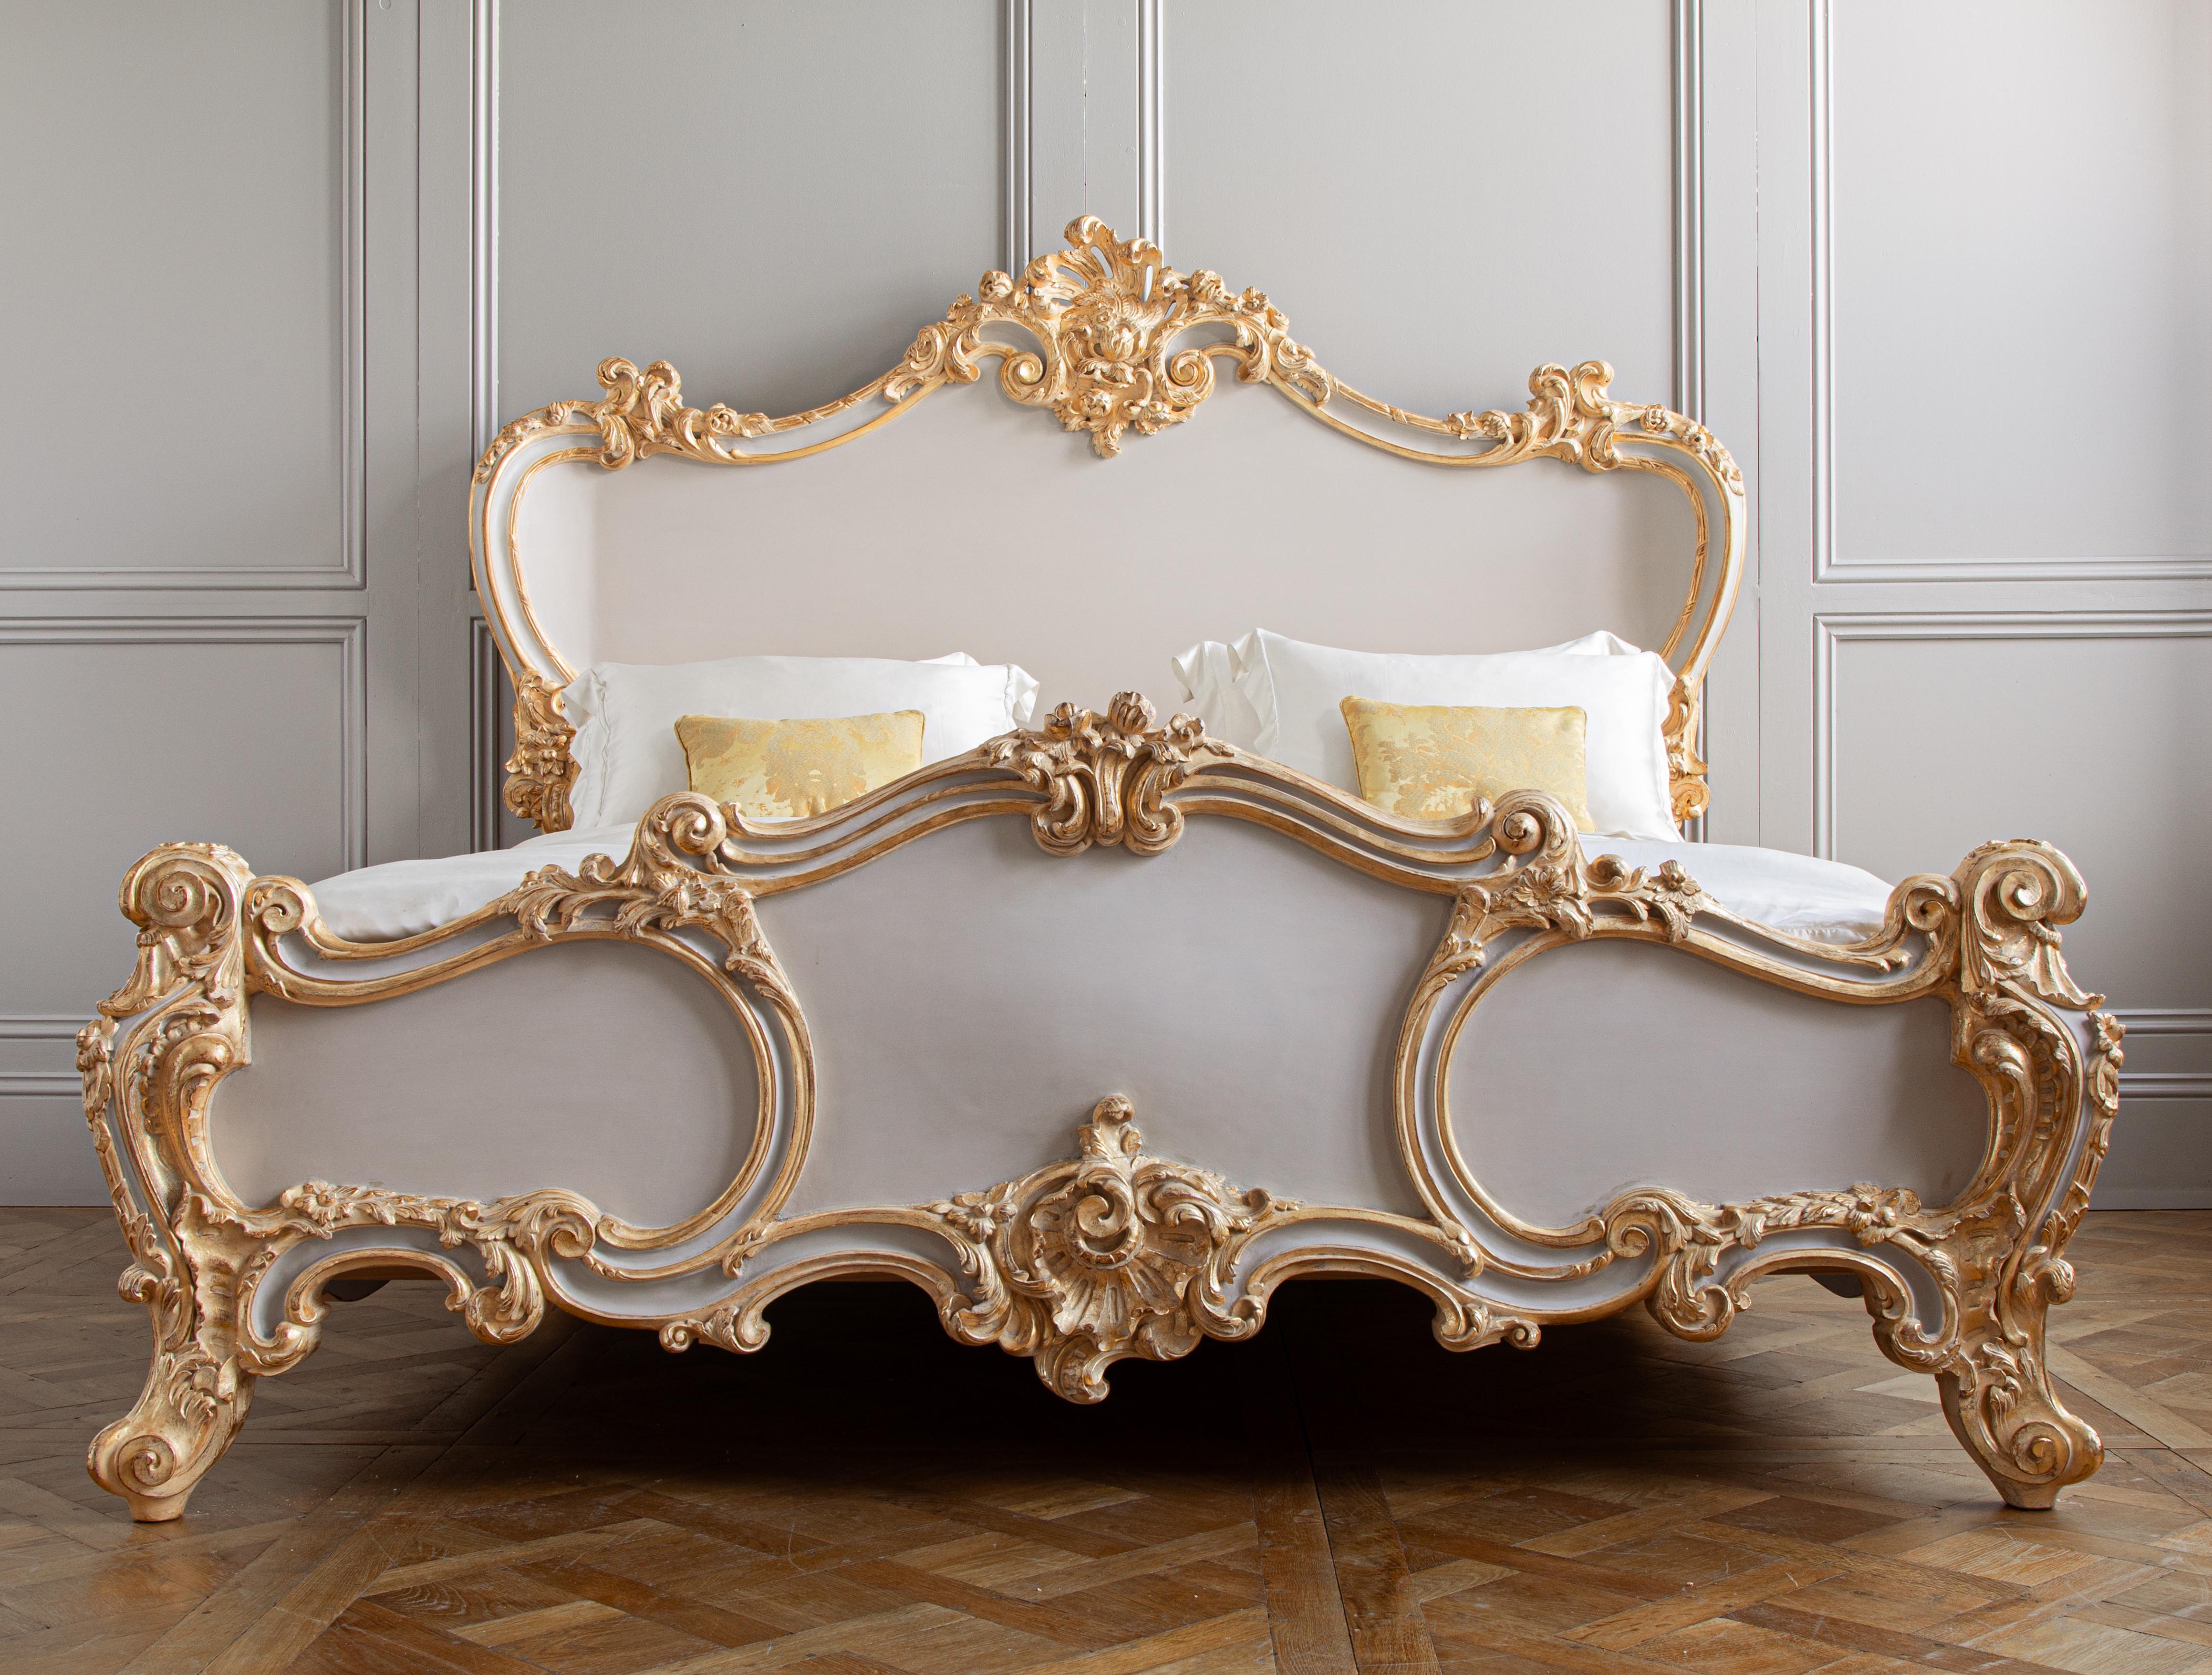 Our iconic Cherub Bed was the first bed we created in our venture to achieve beautifully hand-carved furniture with the aim of capturing all the nuances of antique fine-carving. These pieces are made by master craftsmen to achieve a level of